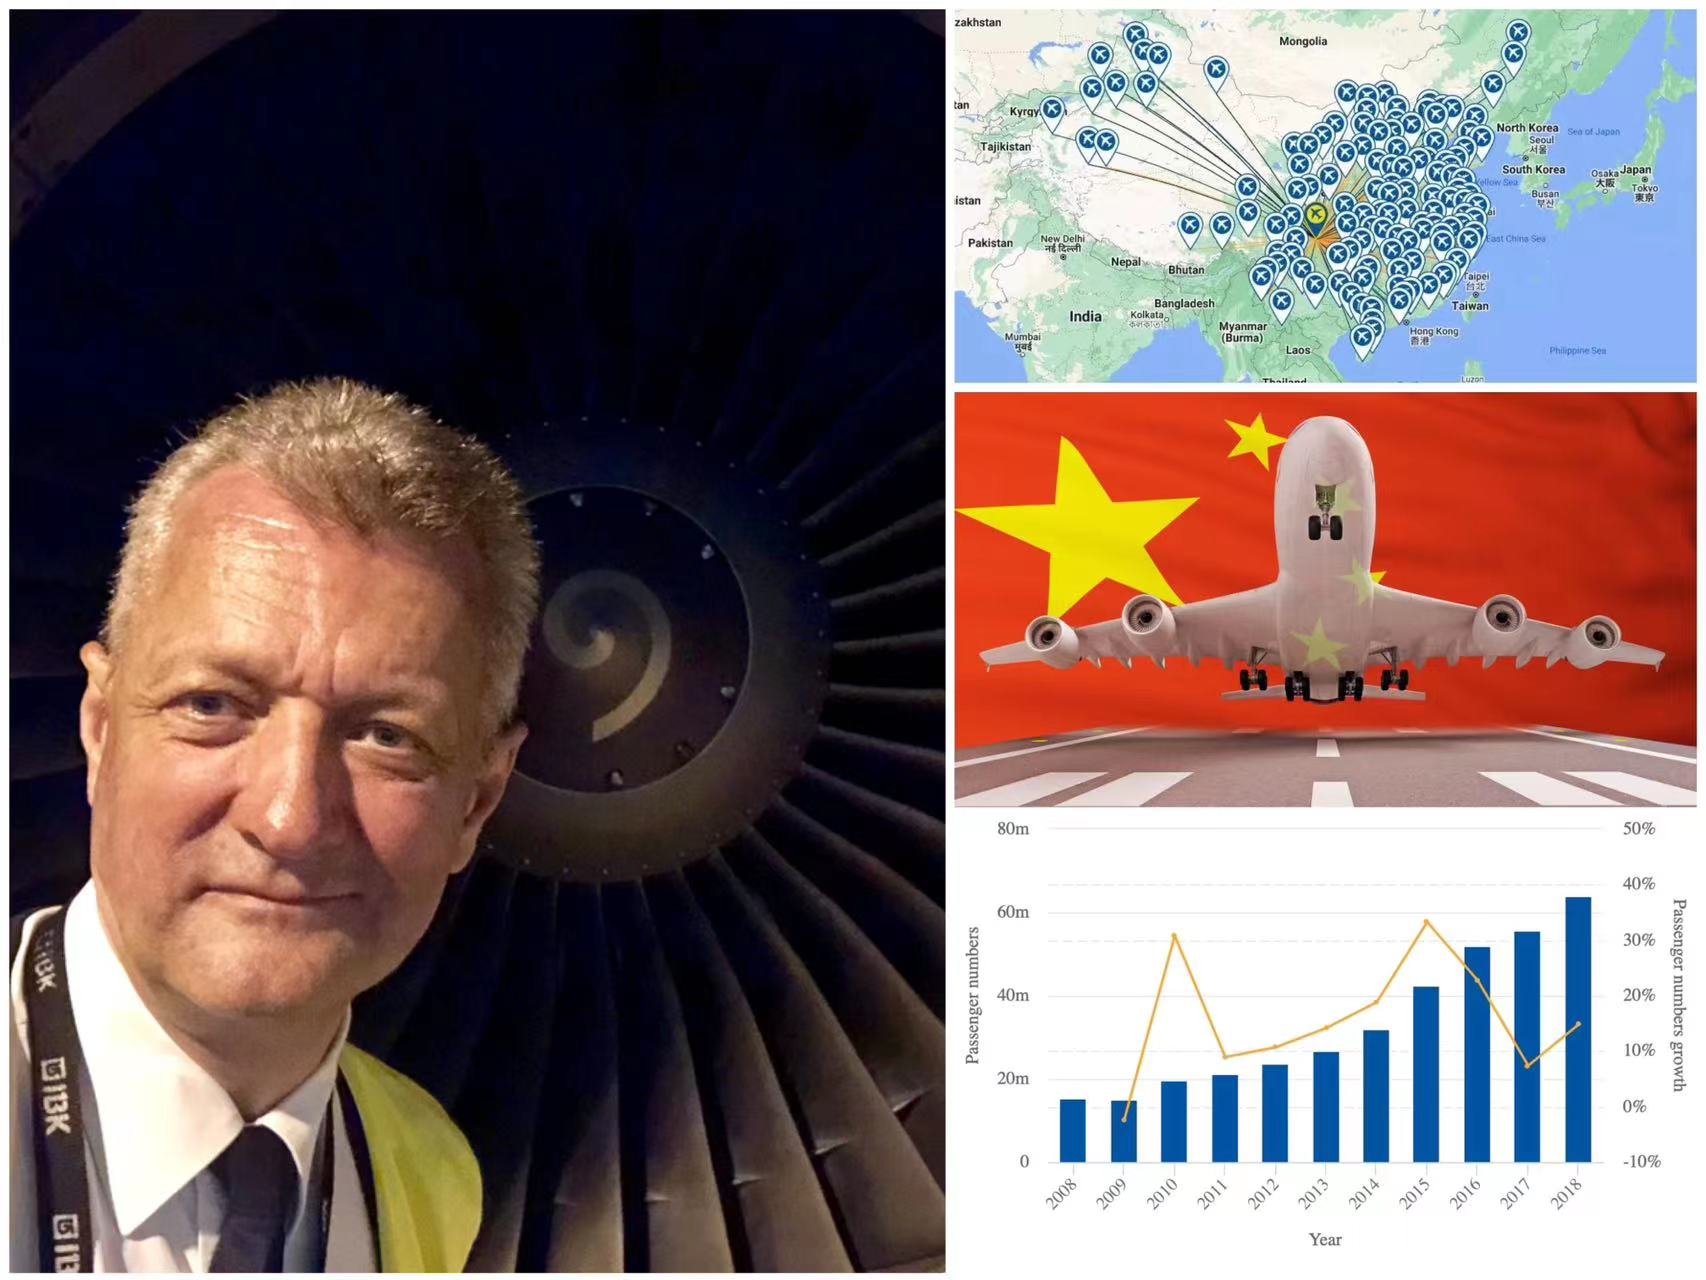 Michael Hundegger: He first came to China on the back of massive growth in the Chinese airline industry.